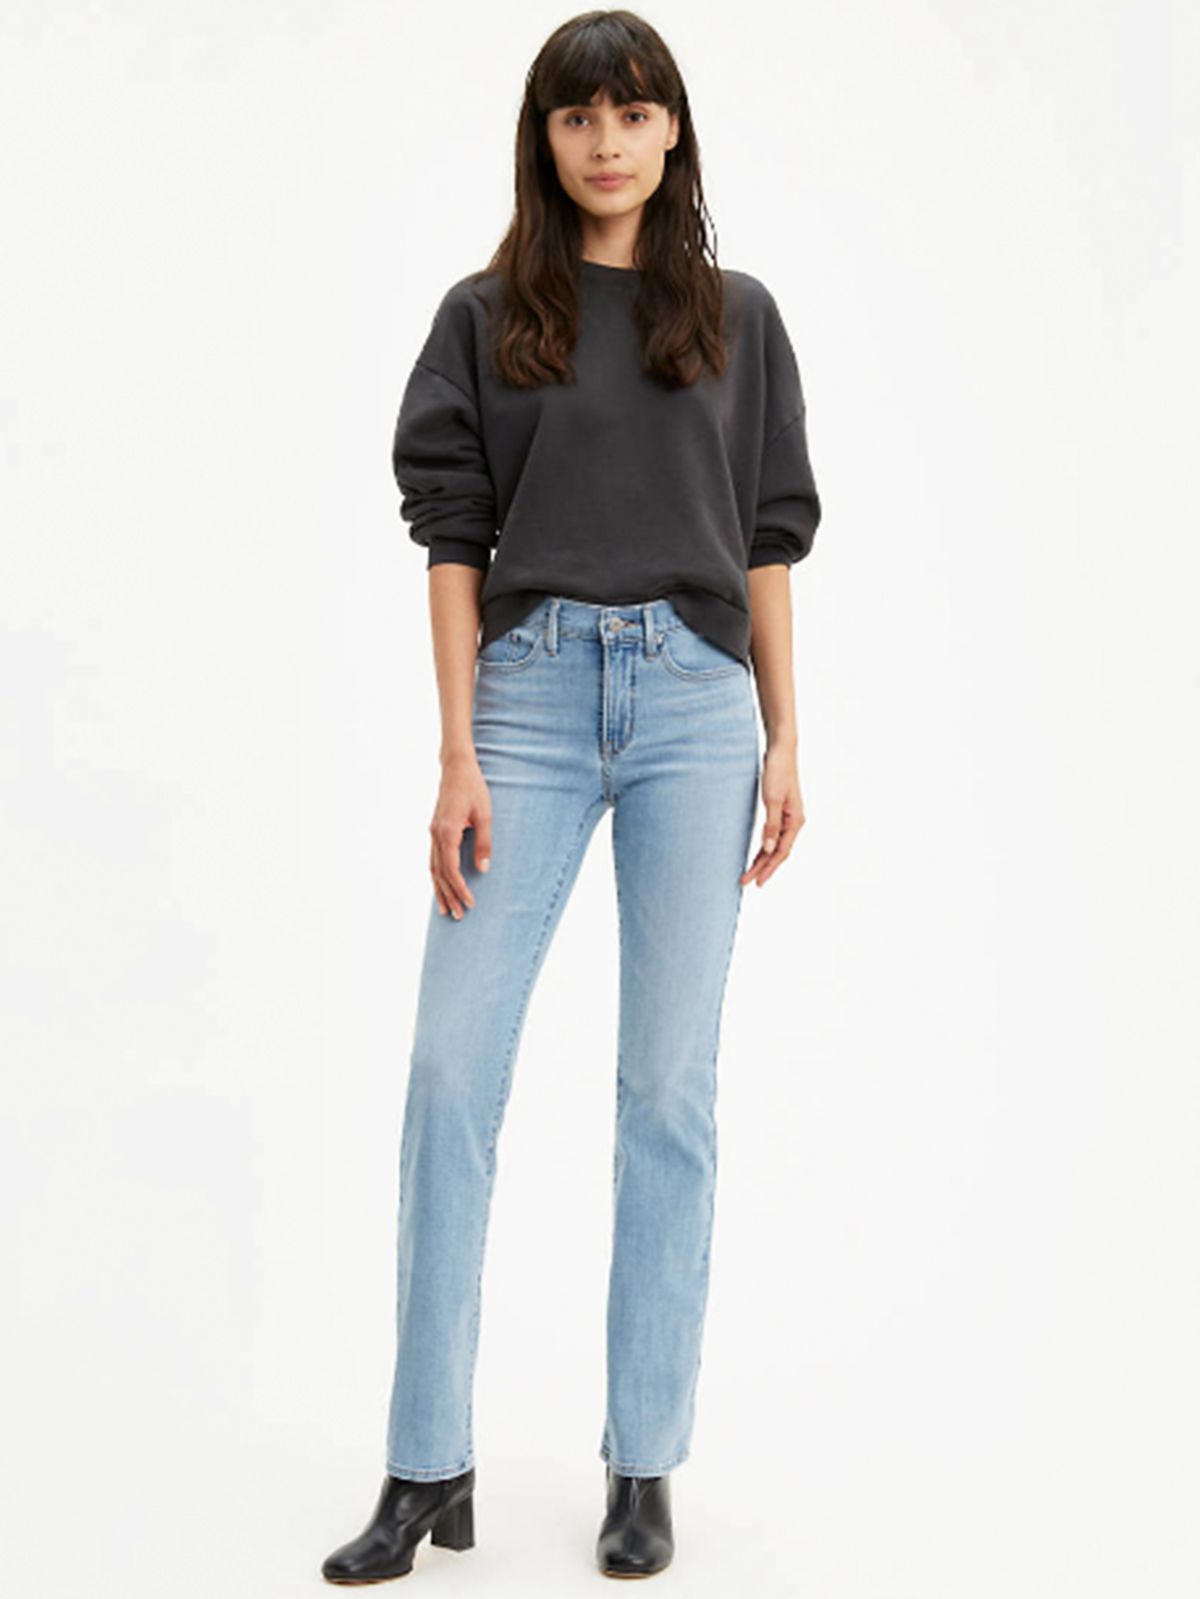 A Stylist on the 3 Best Jeans to Buy If You're Petite | Who What Wear